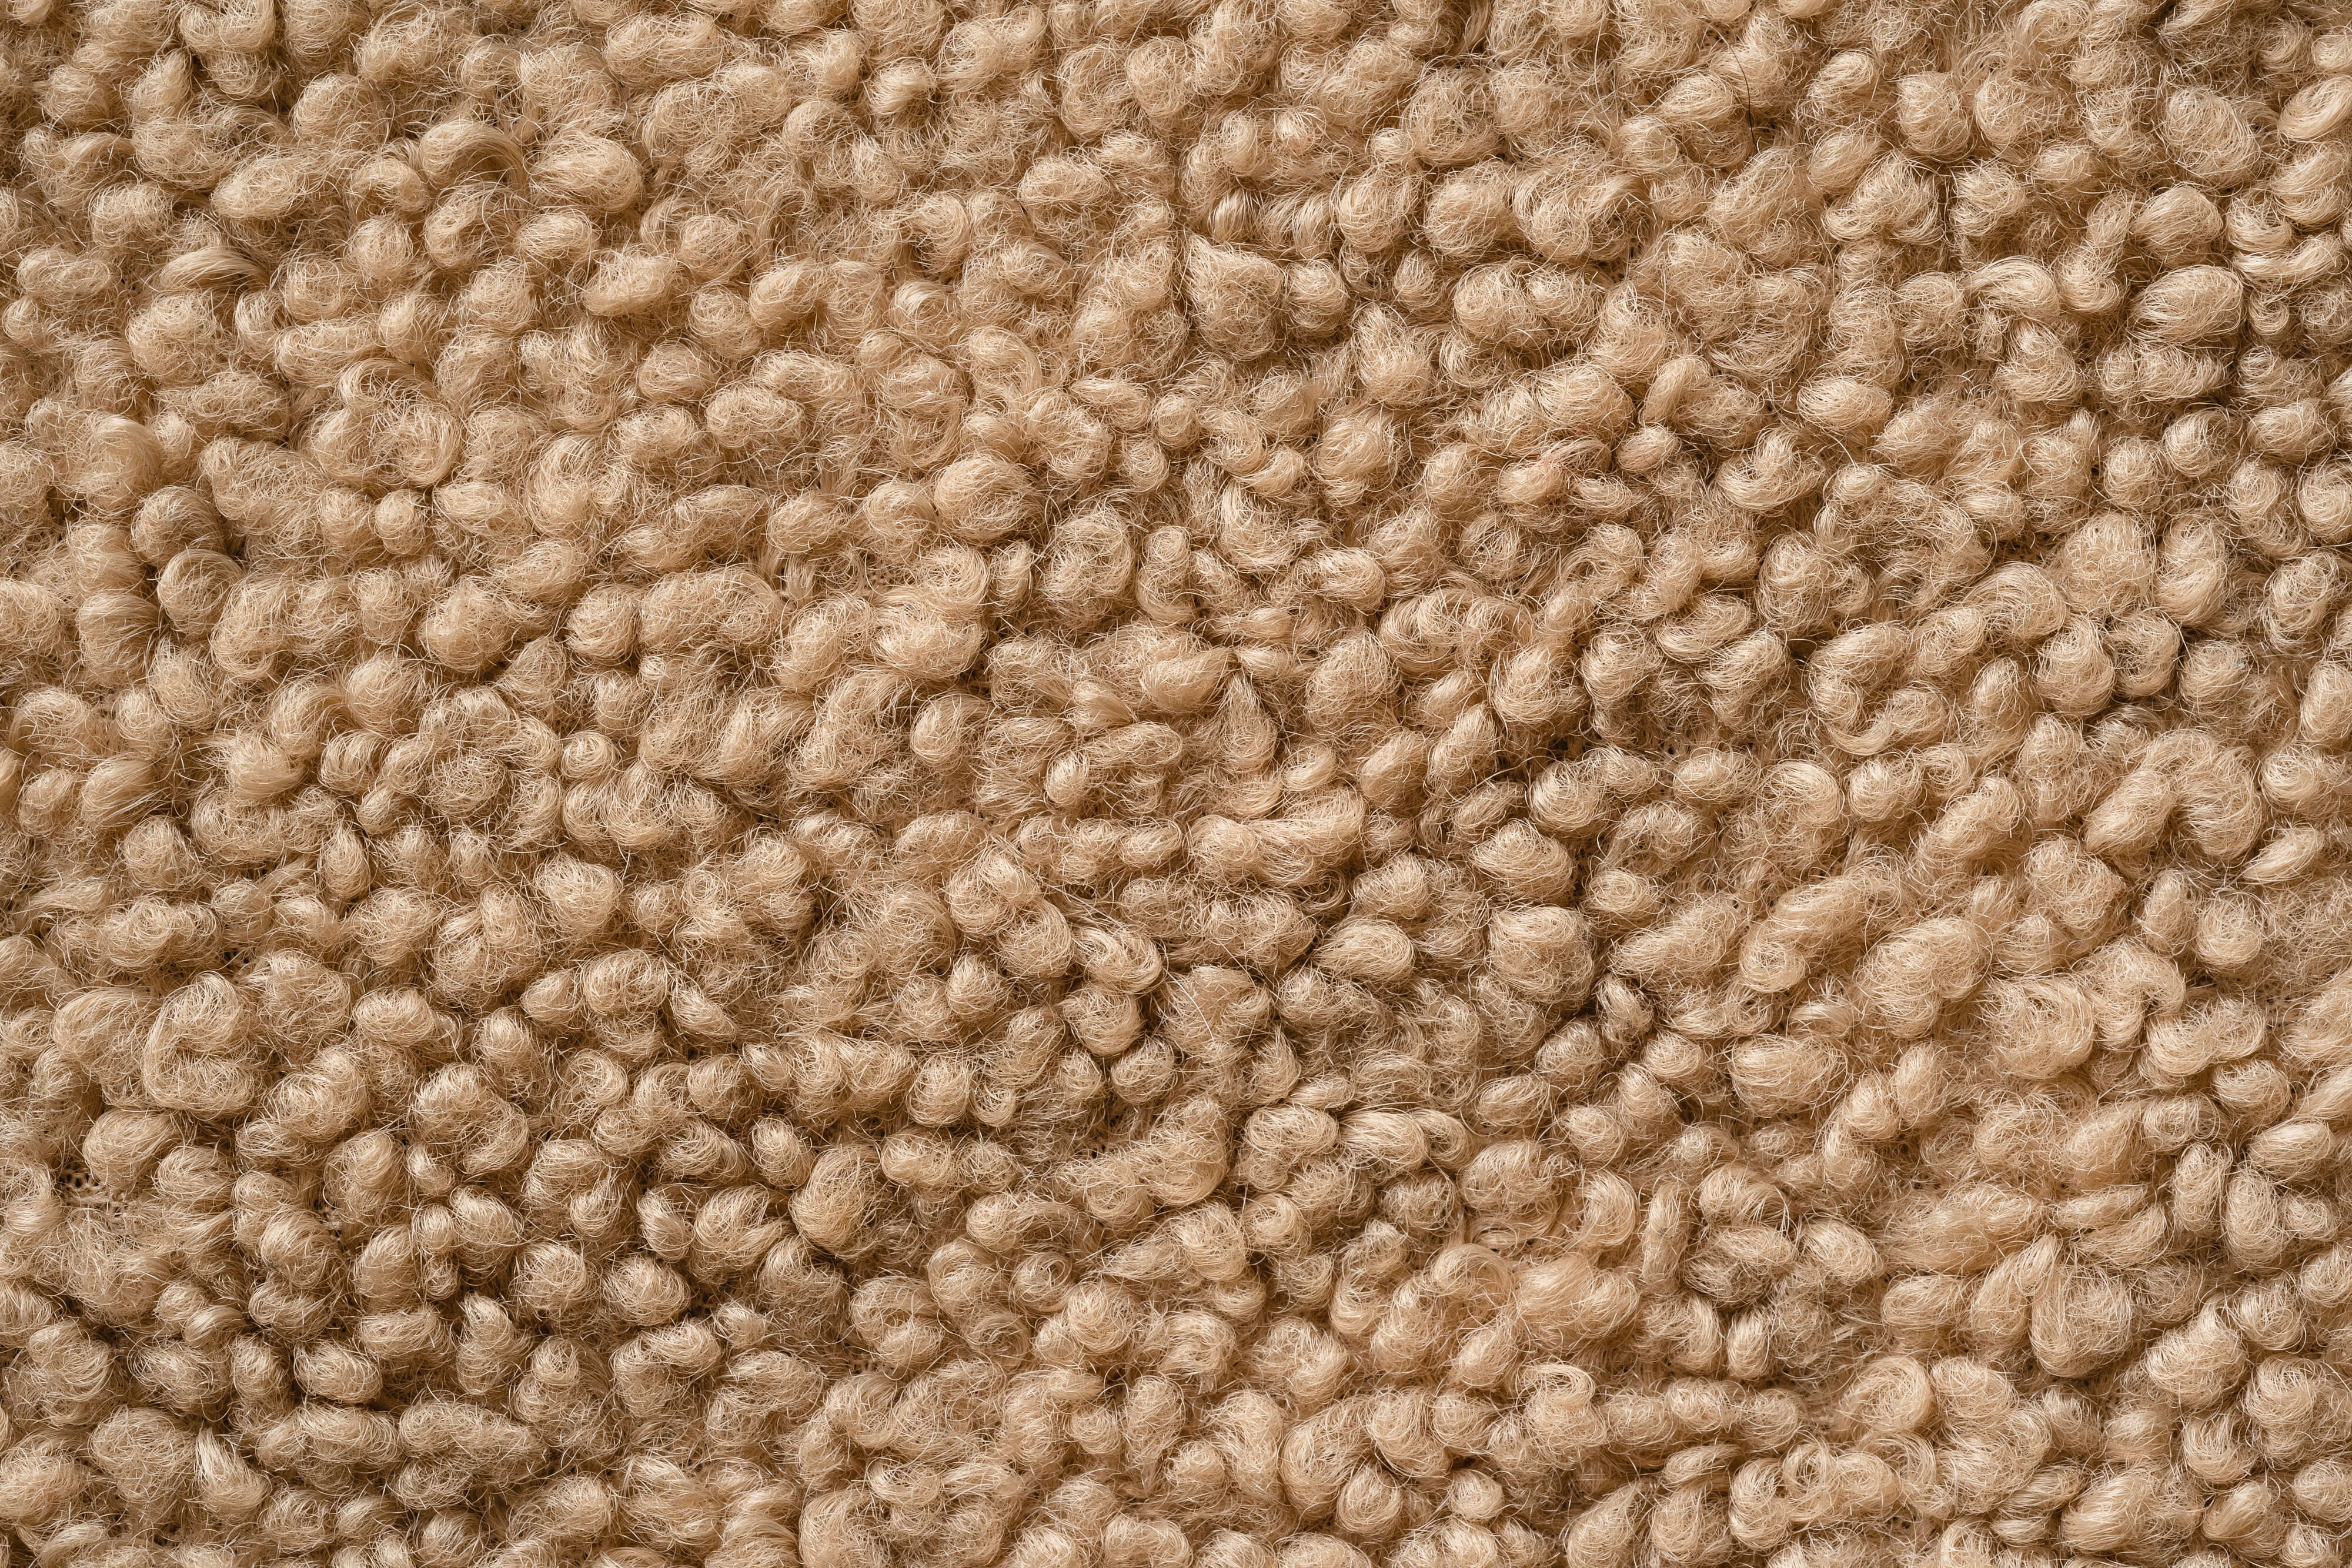 Identify the material of the carpet